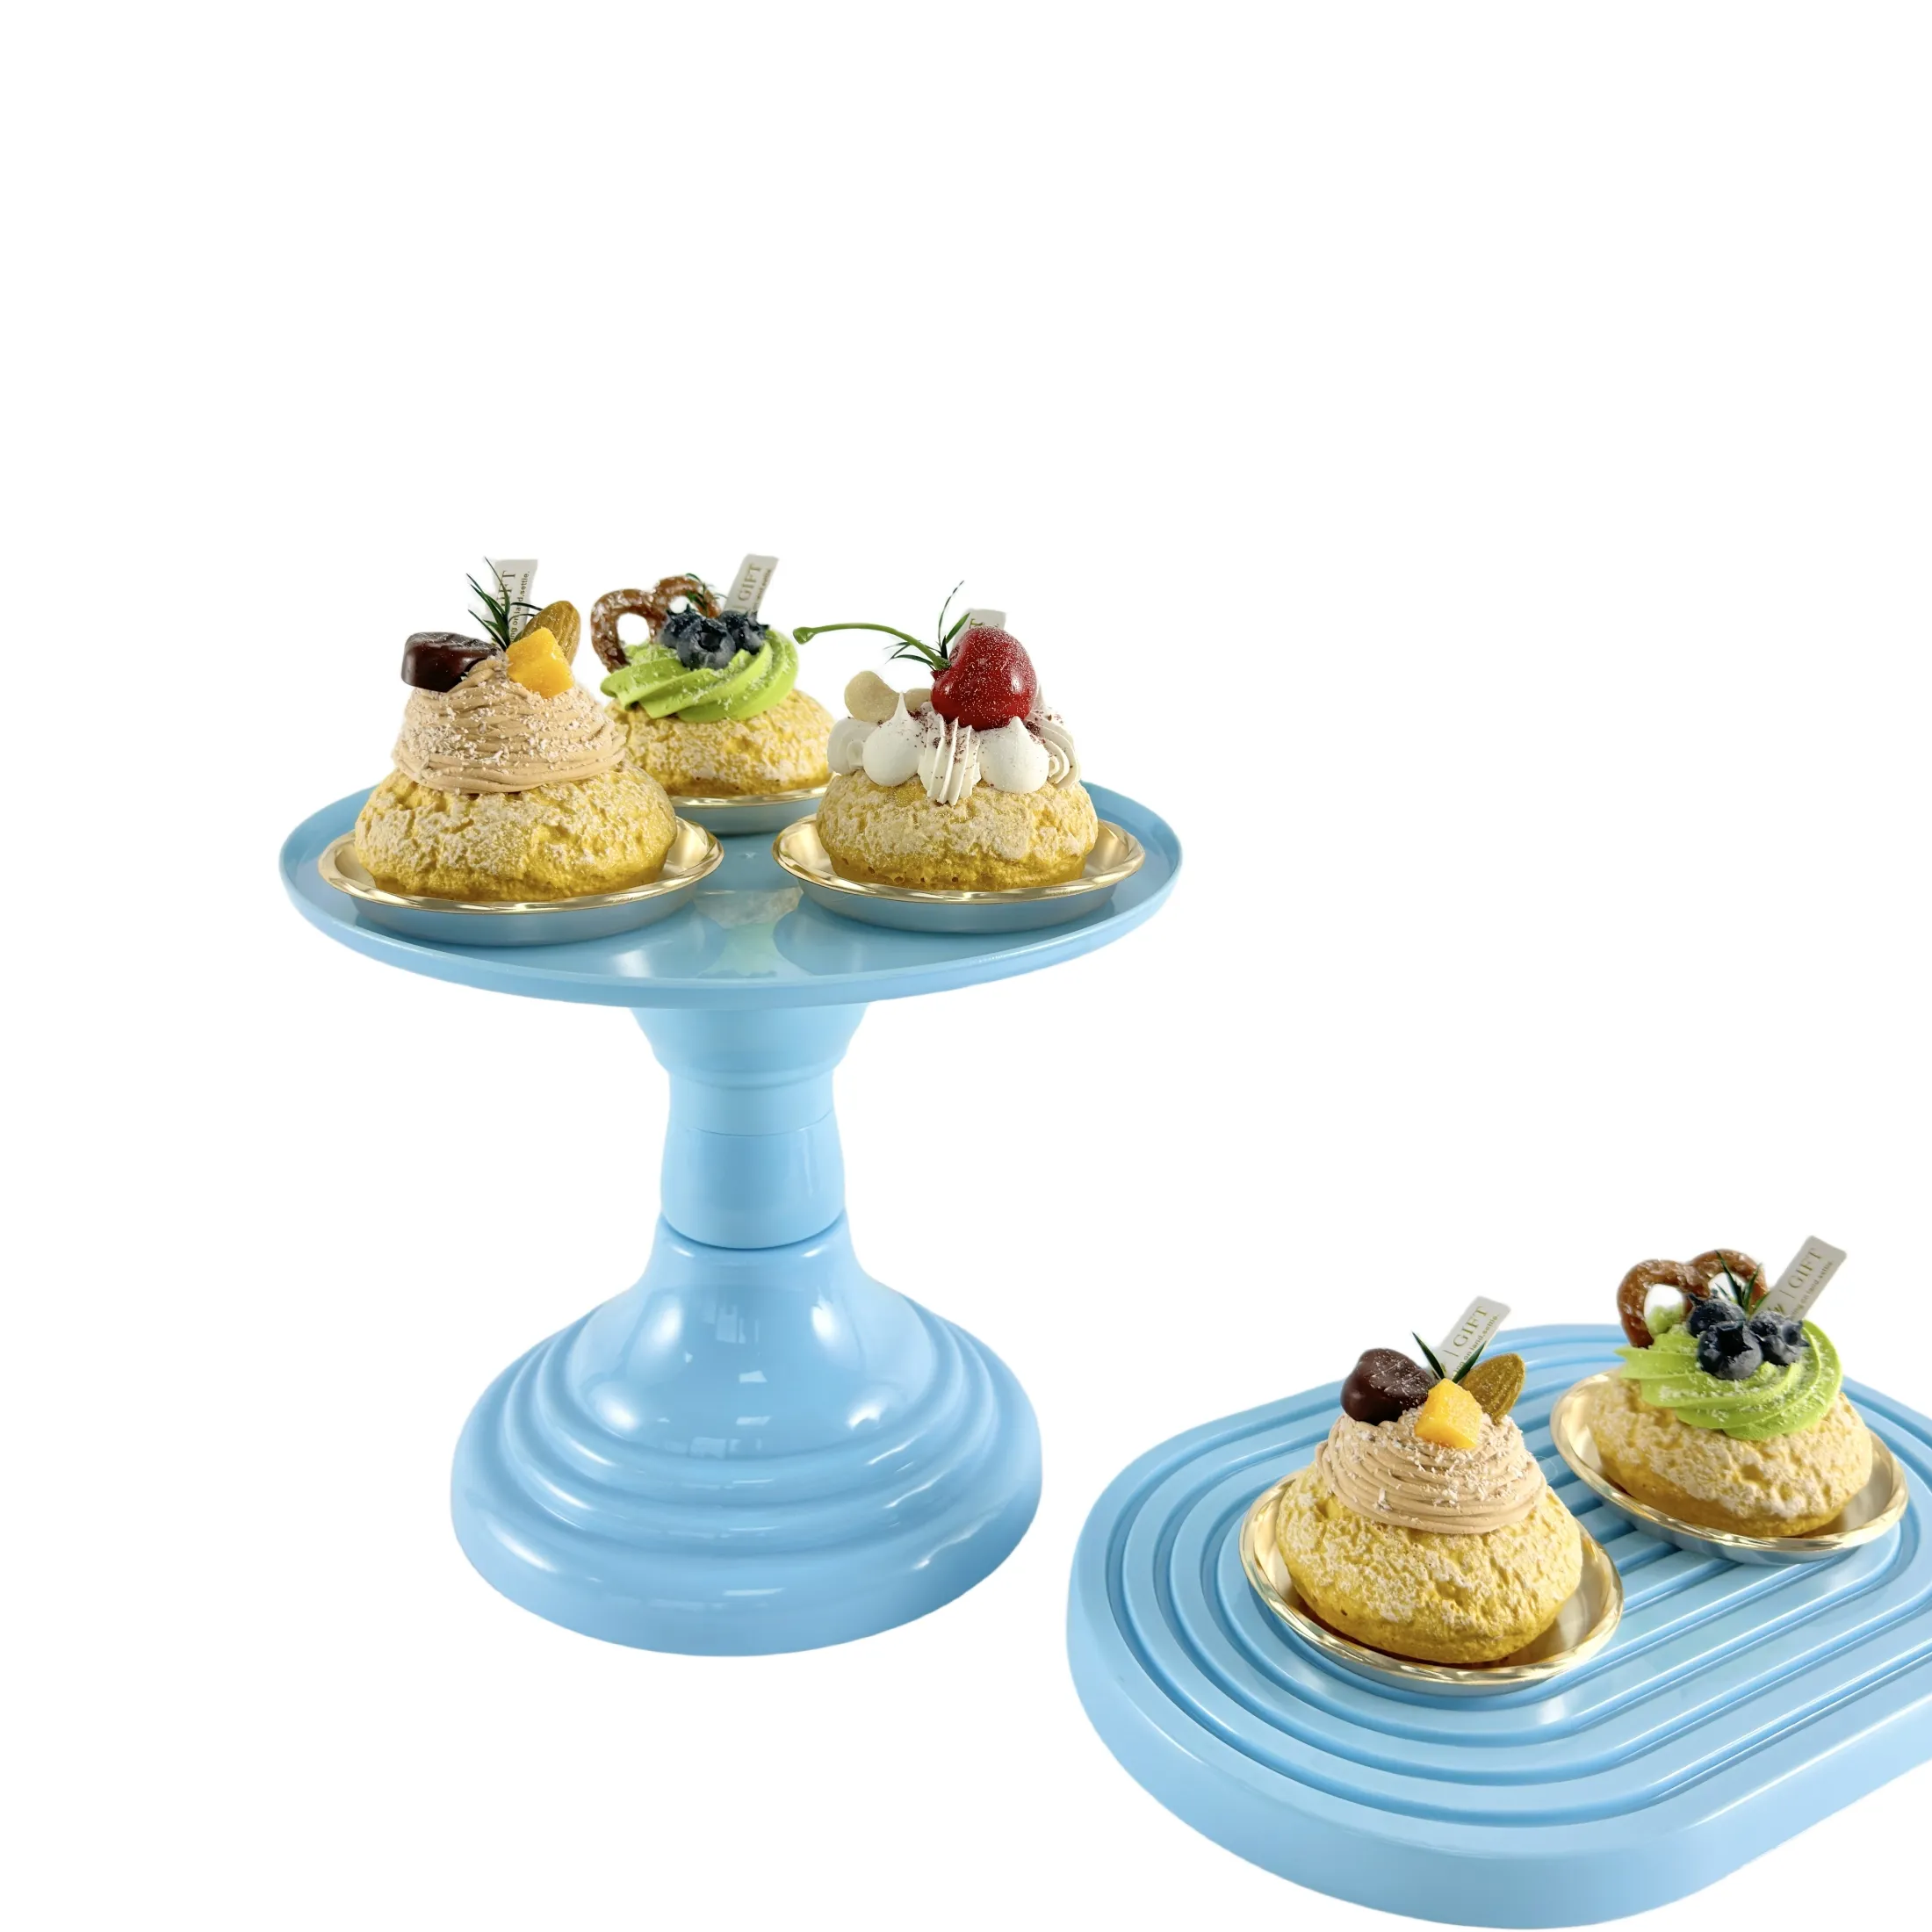 party and wedding decor cake stand creative serving tray fruit platter cake holder cheese plates dessert display stand